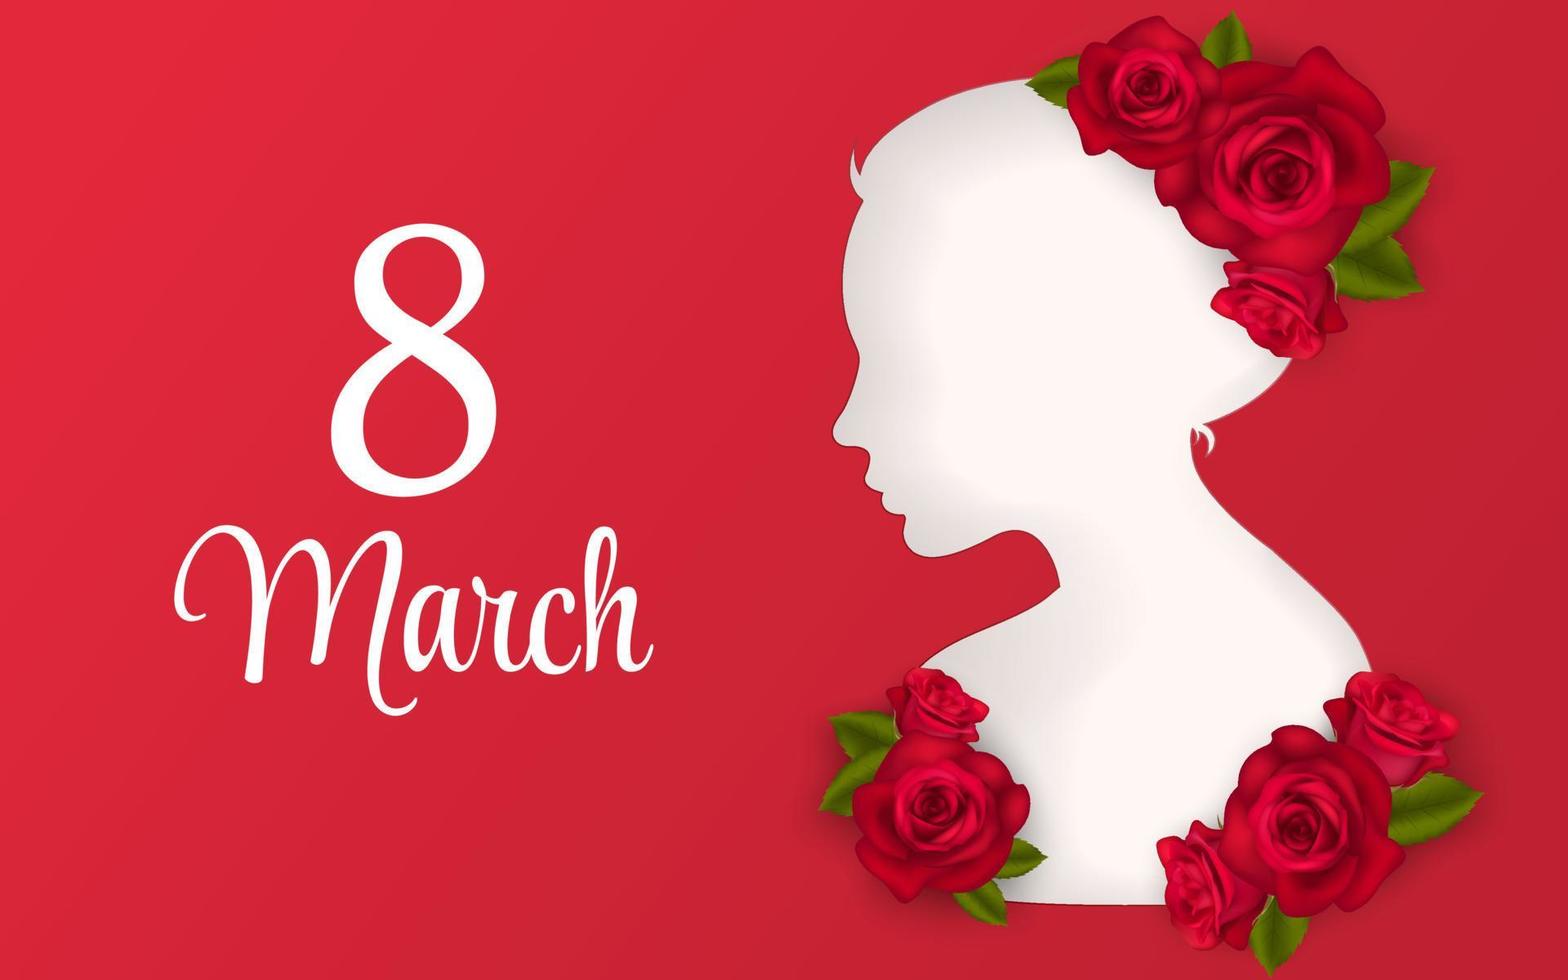 8 March greeting banner with red realistic roses flower bouquet. Woman cut out silhouette, women's day website header vector Illustration. Template for advertising, web, social media